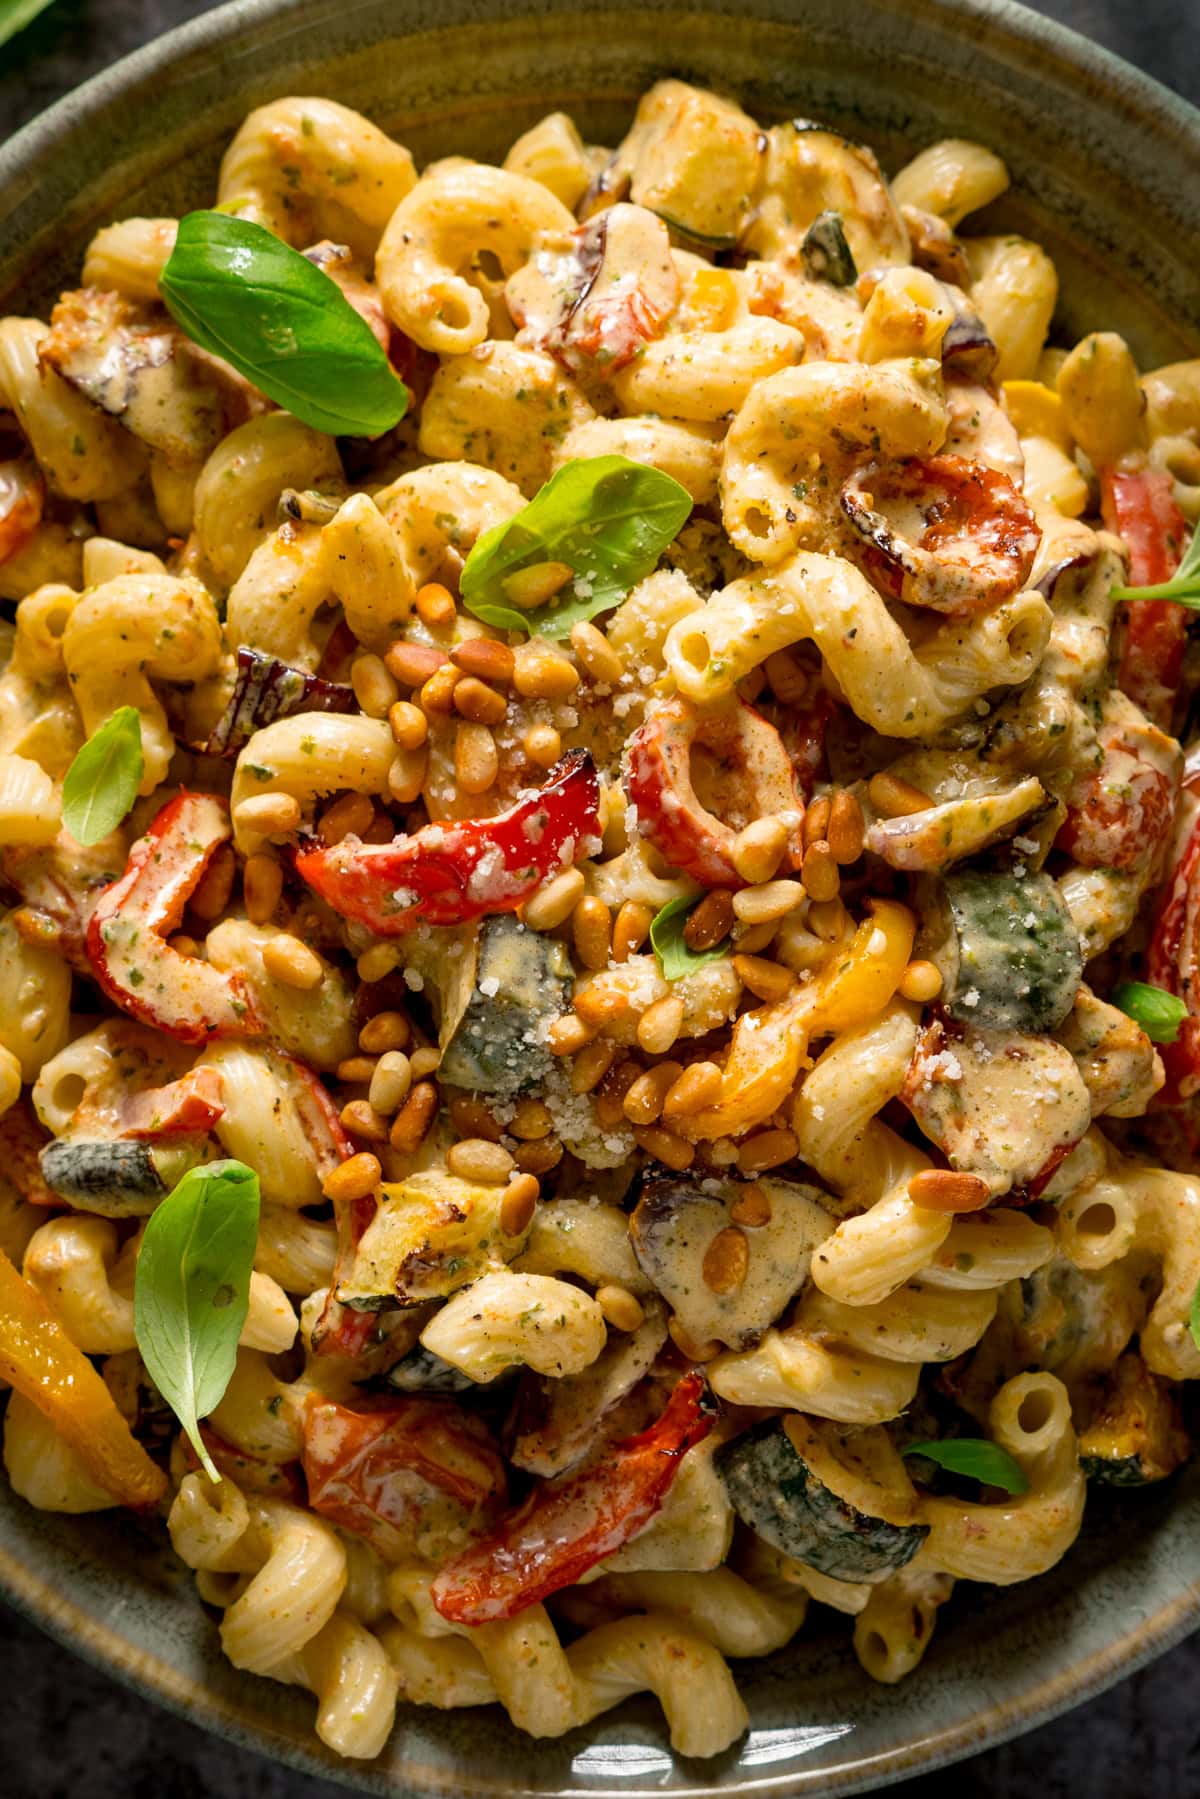 A very close-up tall image of roasted vegetable pesto pasta topped with toasted pine nuts, and a few small basil leaves. This is in a light grey bowl. The pasta an the bowl fill the whole image, so nothing else can be seen.